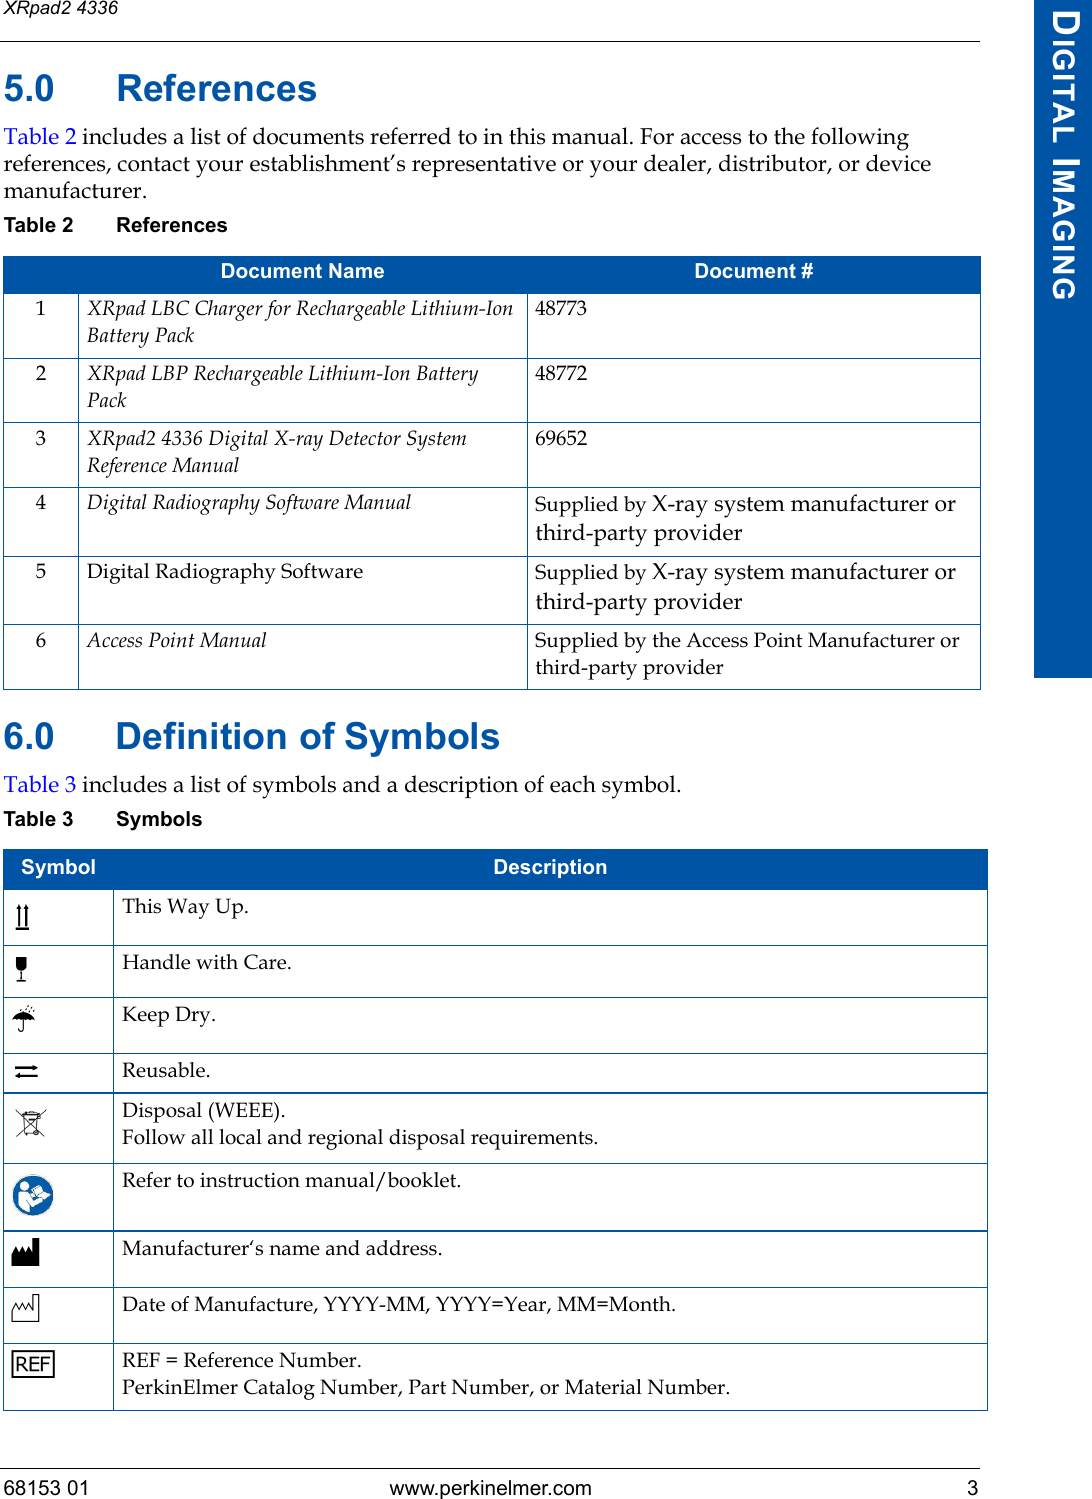 68153 01 www.perkinelmer.com 3XRpad2 4336DIGITAL IMAGING5.0 ReferencesTable 2 includes a list of documents referred to in this manual. For access to the following references, contact your establishment’s representative or your dealer, distributor, or device manufacturer. 6.0 Definition of SymbolsTable 3 includes a list of symbols and a description of each symbol.Table 2 ReferencesDocument Name Document #1XRpad LBC Charger for Rechargeable Lithium-Ion Battery Pack487732XRpad LBP Rechargeable Lithium-Ion Battery Pack487723XRpad2 4336 Digital X-ray Detector System Reference Manual696524Digital Radiography Software Manual Supplied by X-ray system manufacturer or third-party provider5 Digital Radiography Software Supplied by X-ray system manufacturer or third-party provider6Access Point Manual Supplied by the Access Point Manufacturer or third-party providerTable 3 SymbolsSymbol DescriptionThis Way Up.Handle with Care.pKeep Dry.Reusable.Disposal (WEEE).Follow all local and regional disposal requirements.Refer to instruction manual/booklet.MManufacturer‘s name and address.NDate of Manufacture, YYYY-MM, YYYY=Year, MM=Month.hREF = Reference Number.PerkinElmer Catalog Number, Part Number, or Material Number.